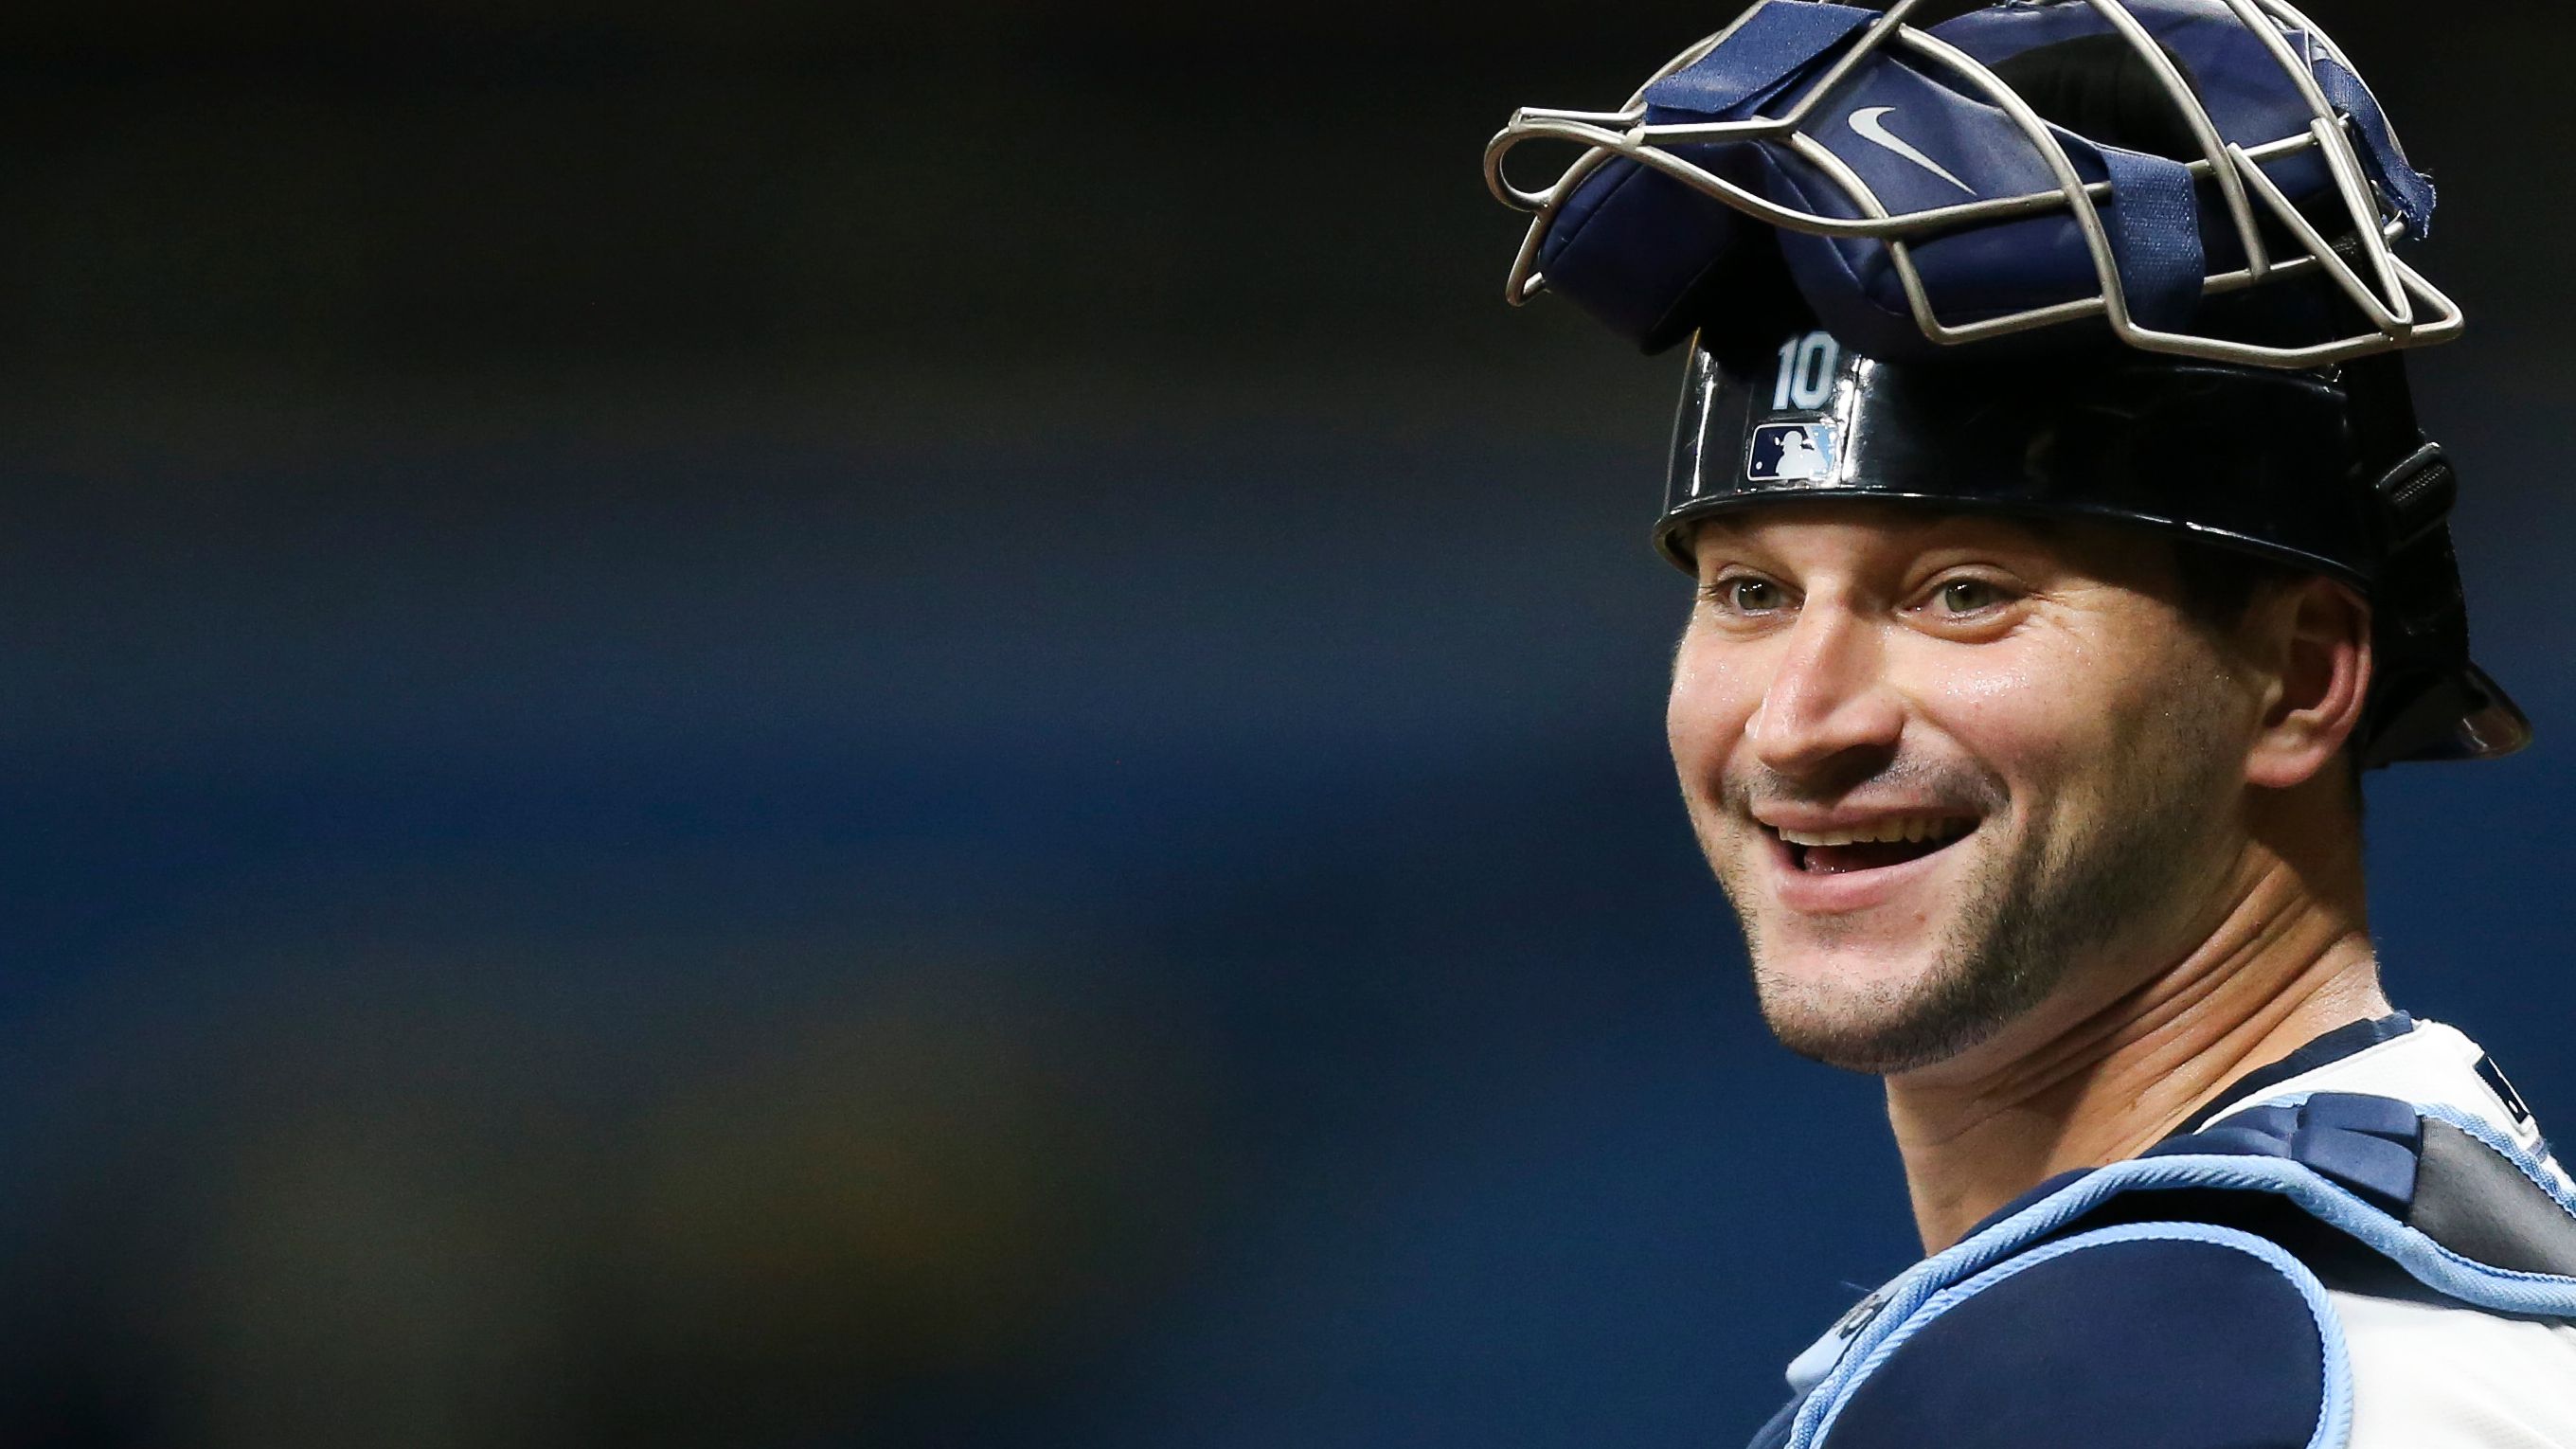 Mike Zunino Family: Wife, Children, Parents, Siblings